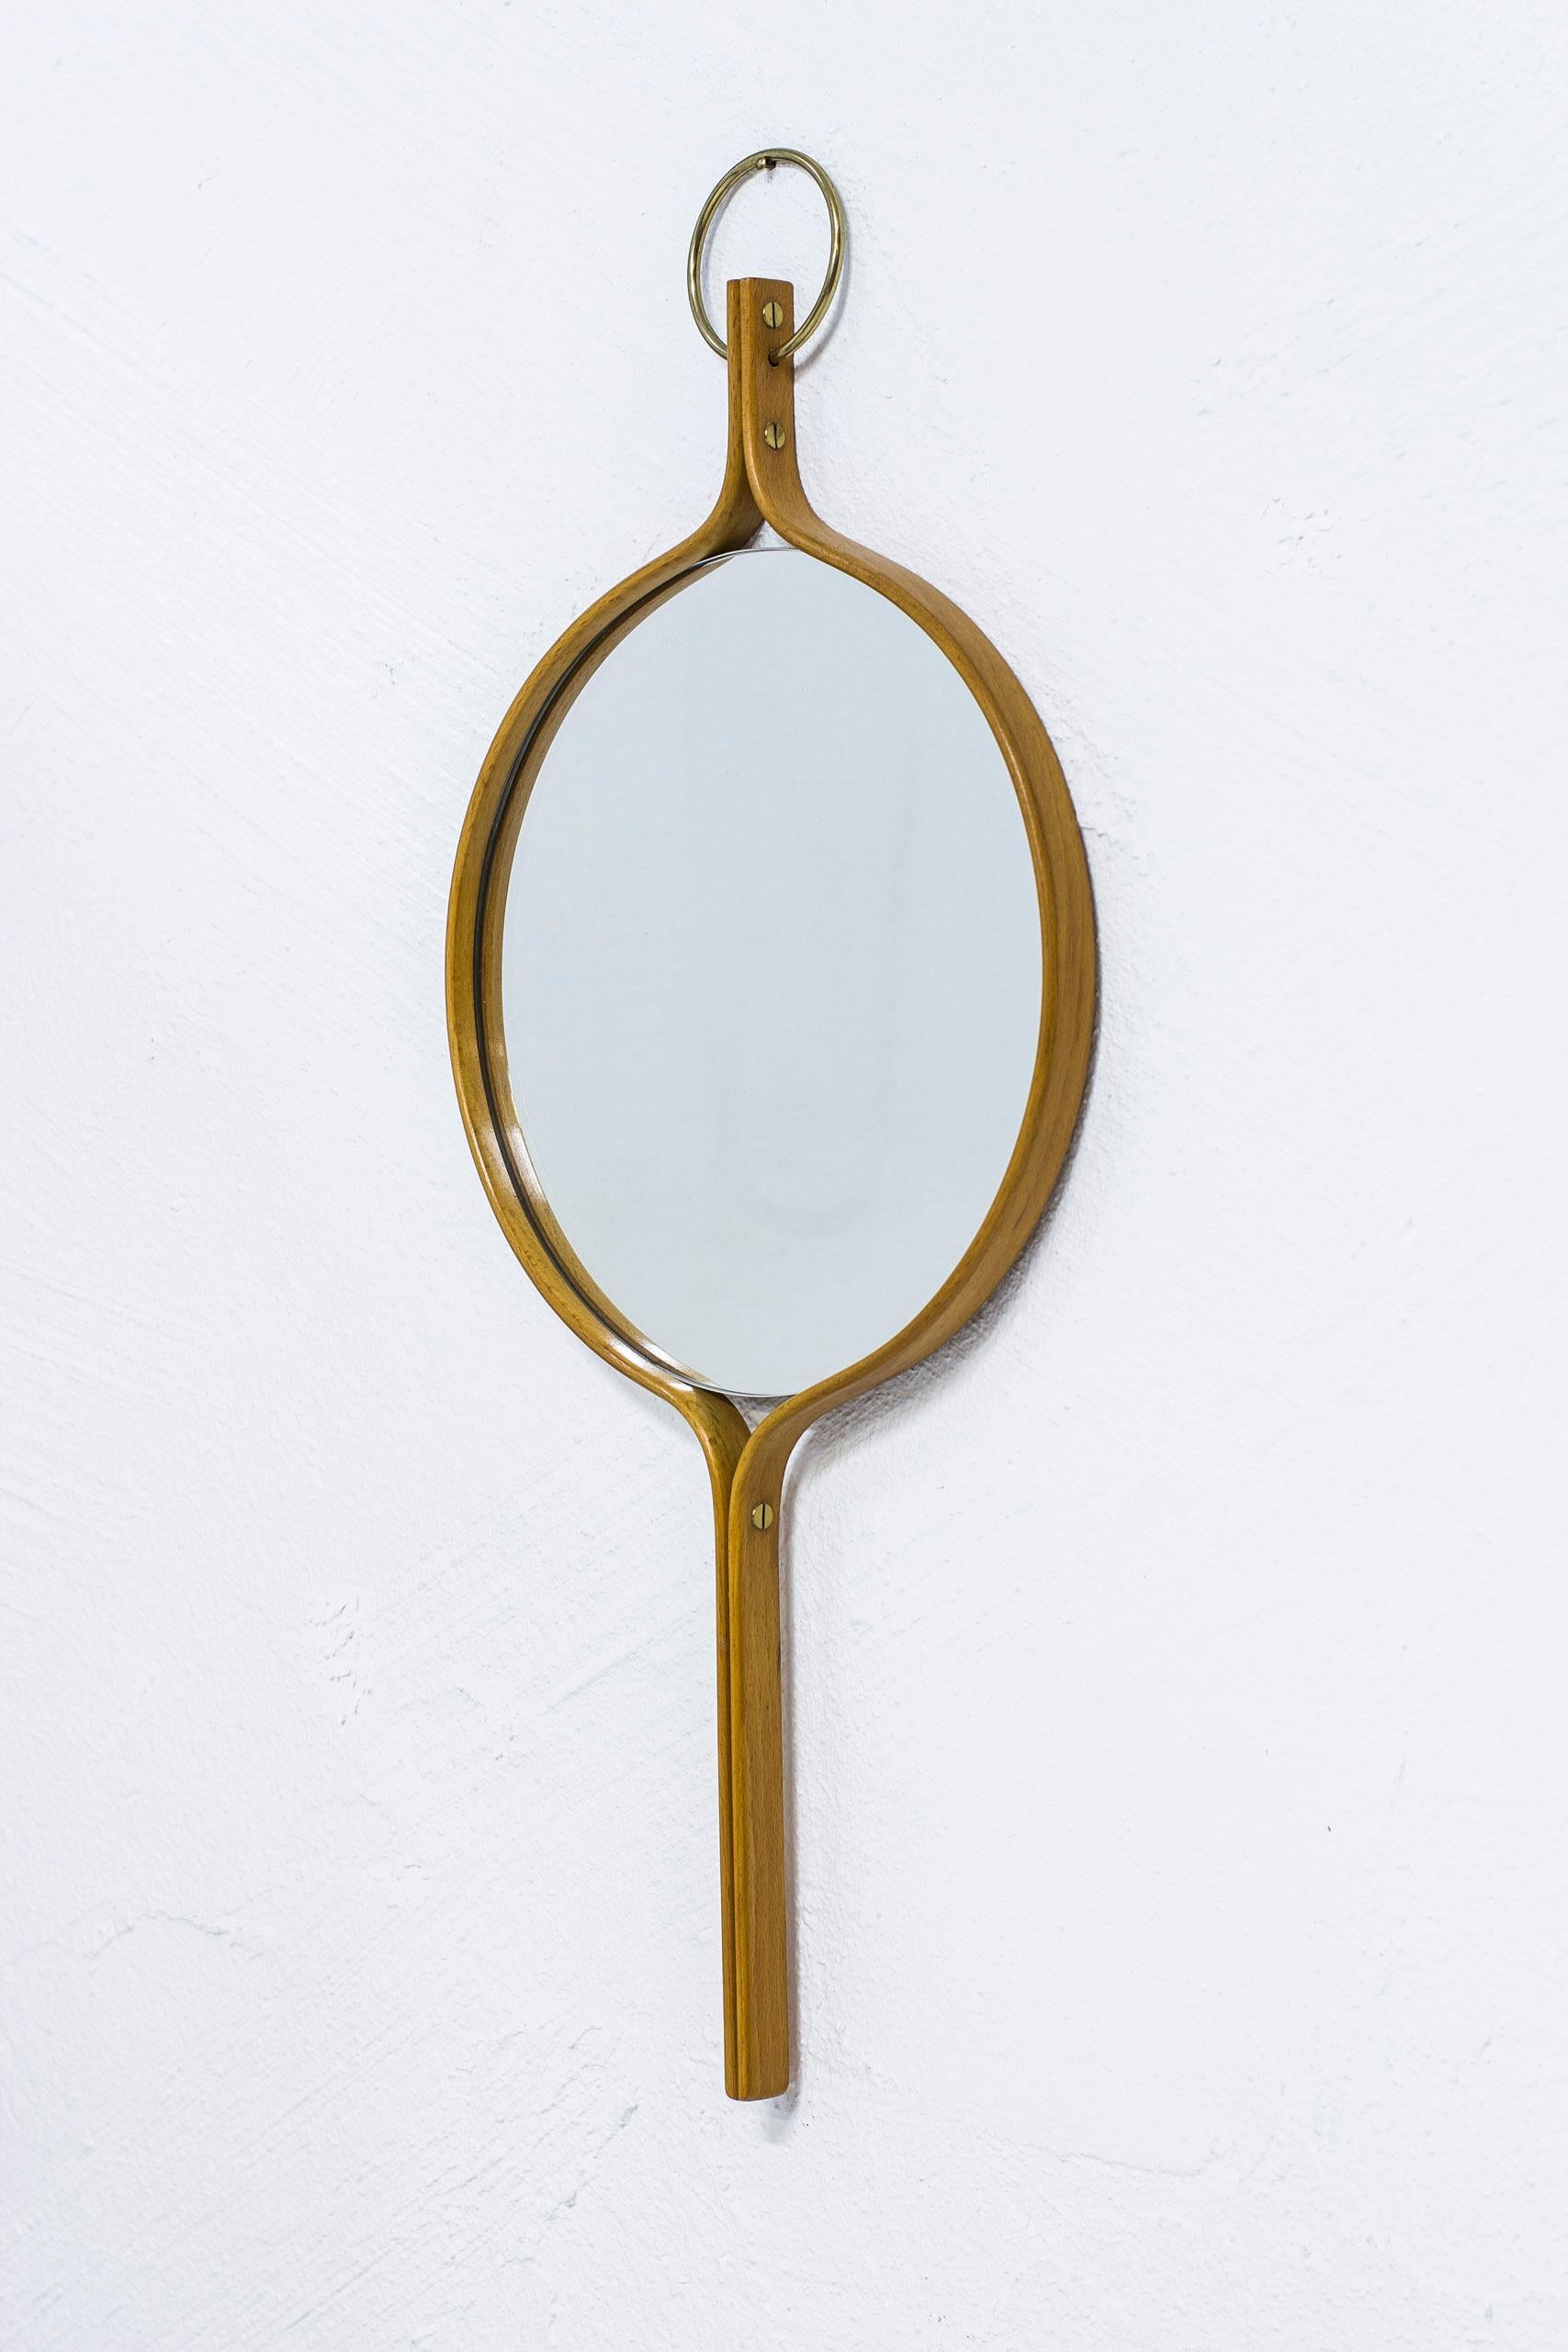 Wall mirror produced by Svensk Hemslöjd in Stockholm. Most likely designed by Marianne von Munchow, head of design at Sv. Hemslöjd during the mid-1950s to mid-1960s. Made from solid mahogany with brass edge. Very good condition with light age